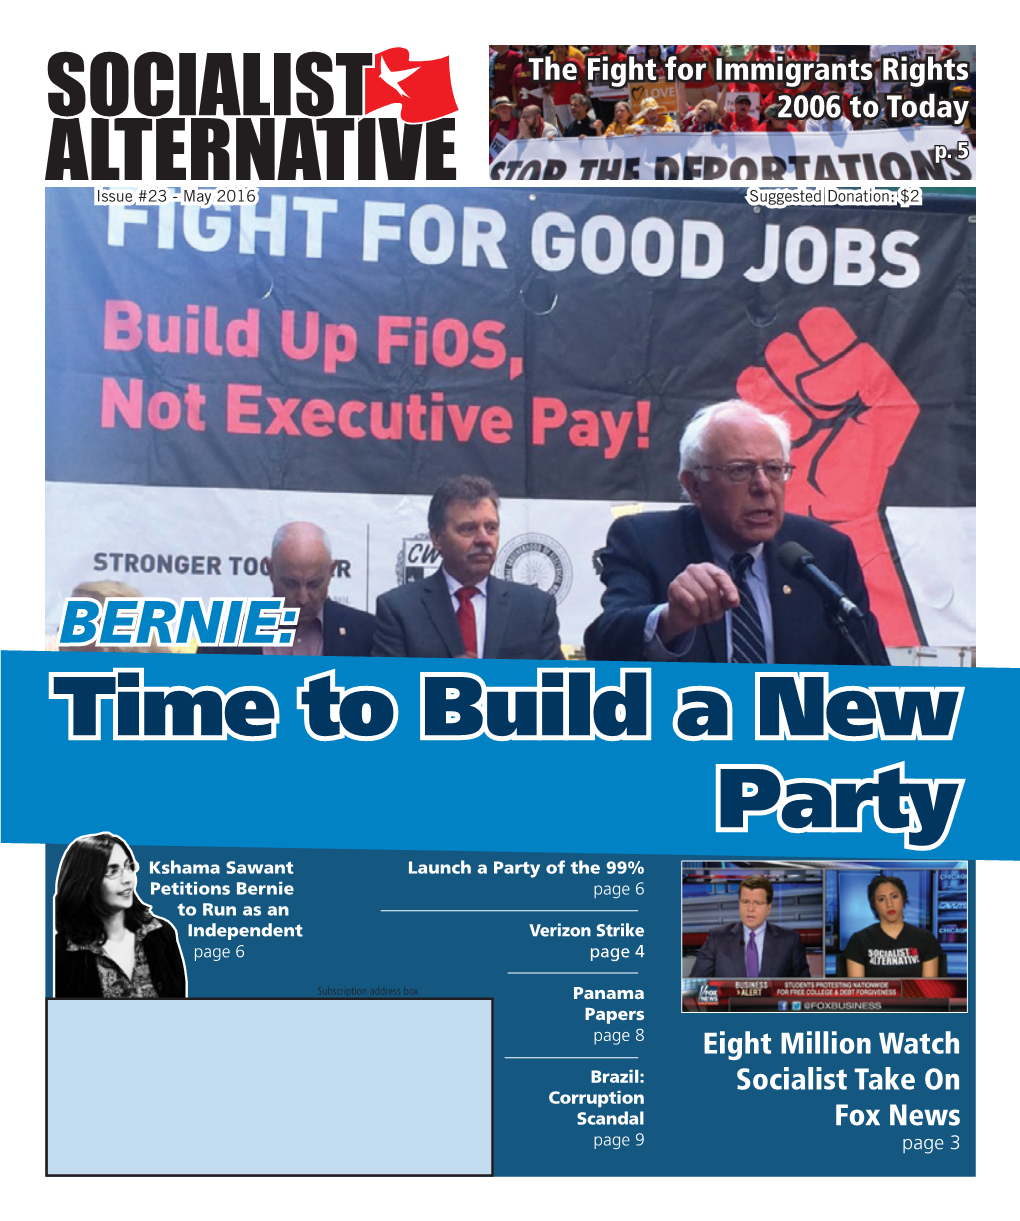 Time to Build a New Party Kshama Sawant Launch a Party of the 99% Petitions Bernie Page 6 to Run As an Independent Verizon Strike Page 6 Page 4